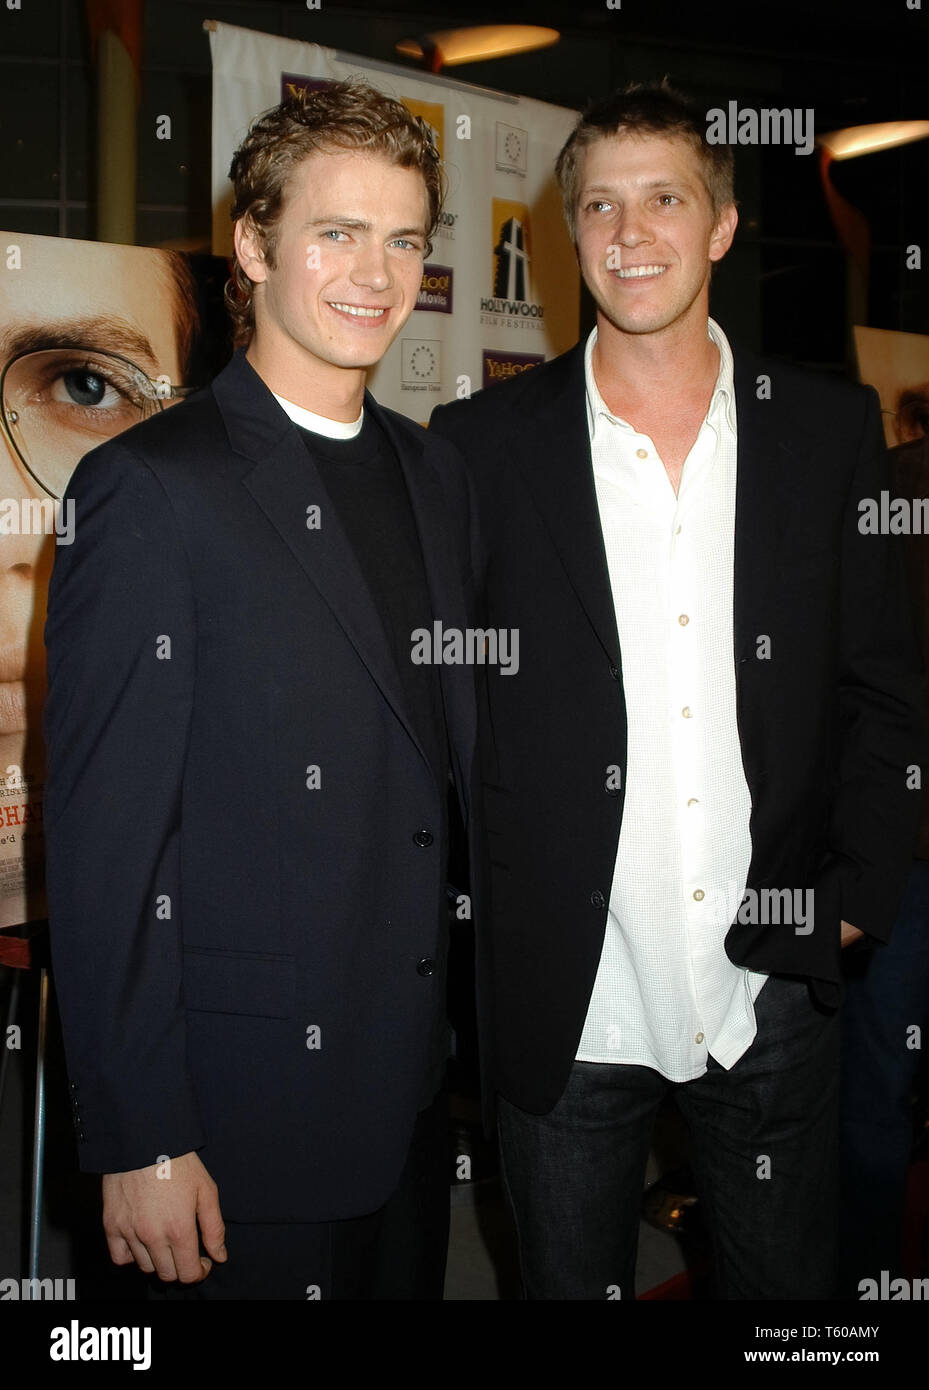 Hayden Christensen & brother Tove Christensen at the Hollywood Film Festival - Closing Night 'Shattered Glass' Los Angeles Premiere at the Arclight Hollywood in Hollywood, CA. The event took place on Sunday, October 19, 2003. Photo by: SBM / PictureLux  File Reference # 33790 1134SBMPLX Stock Photo